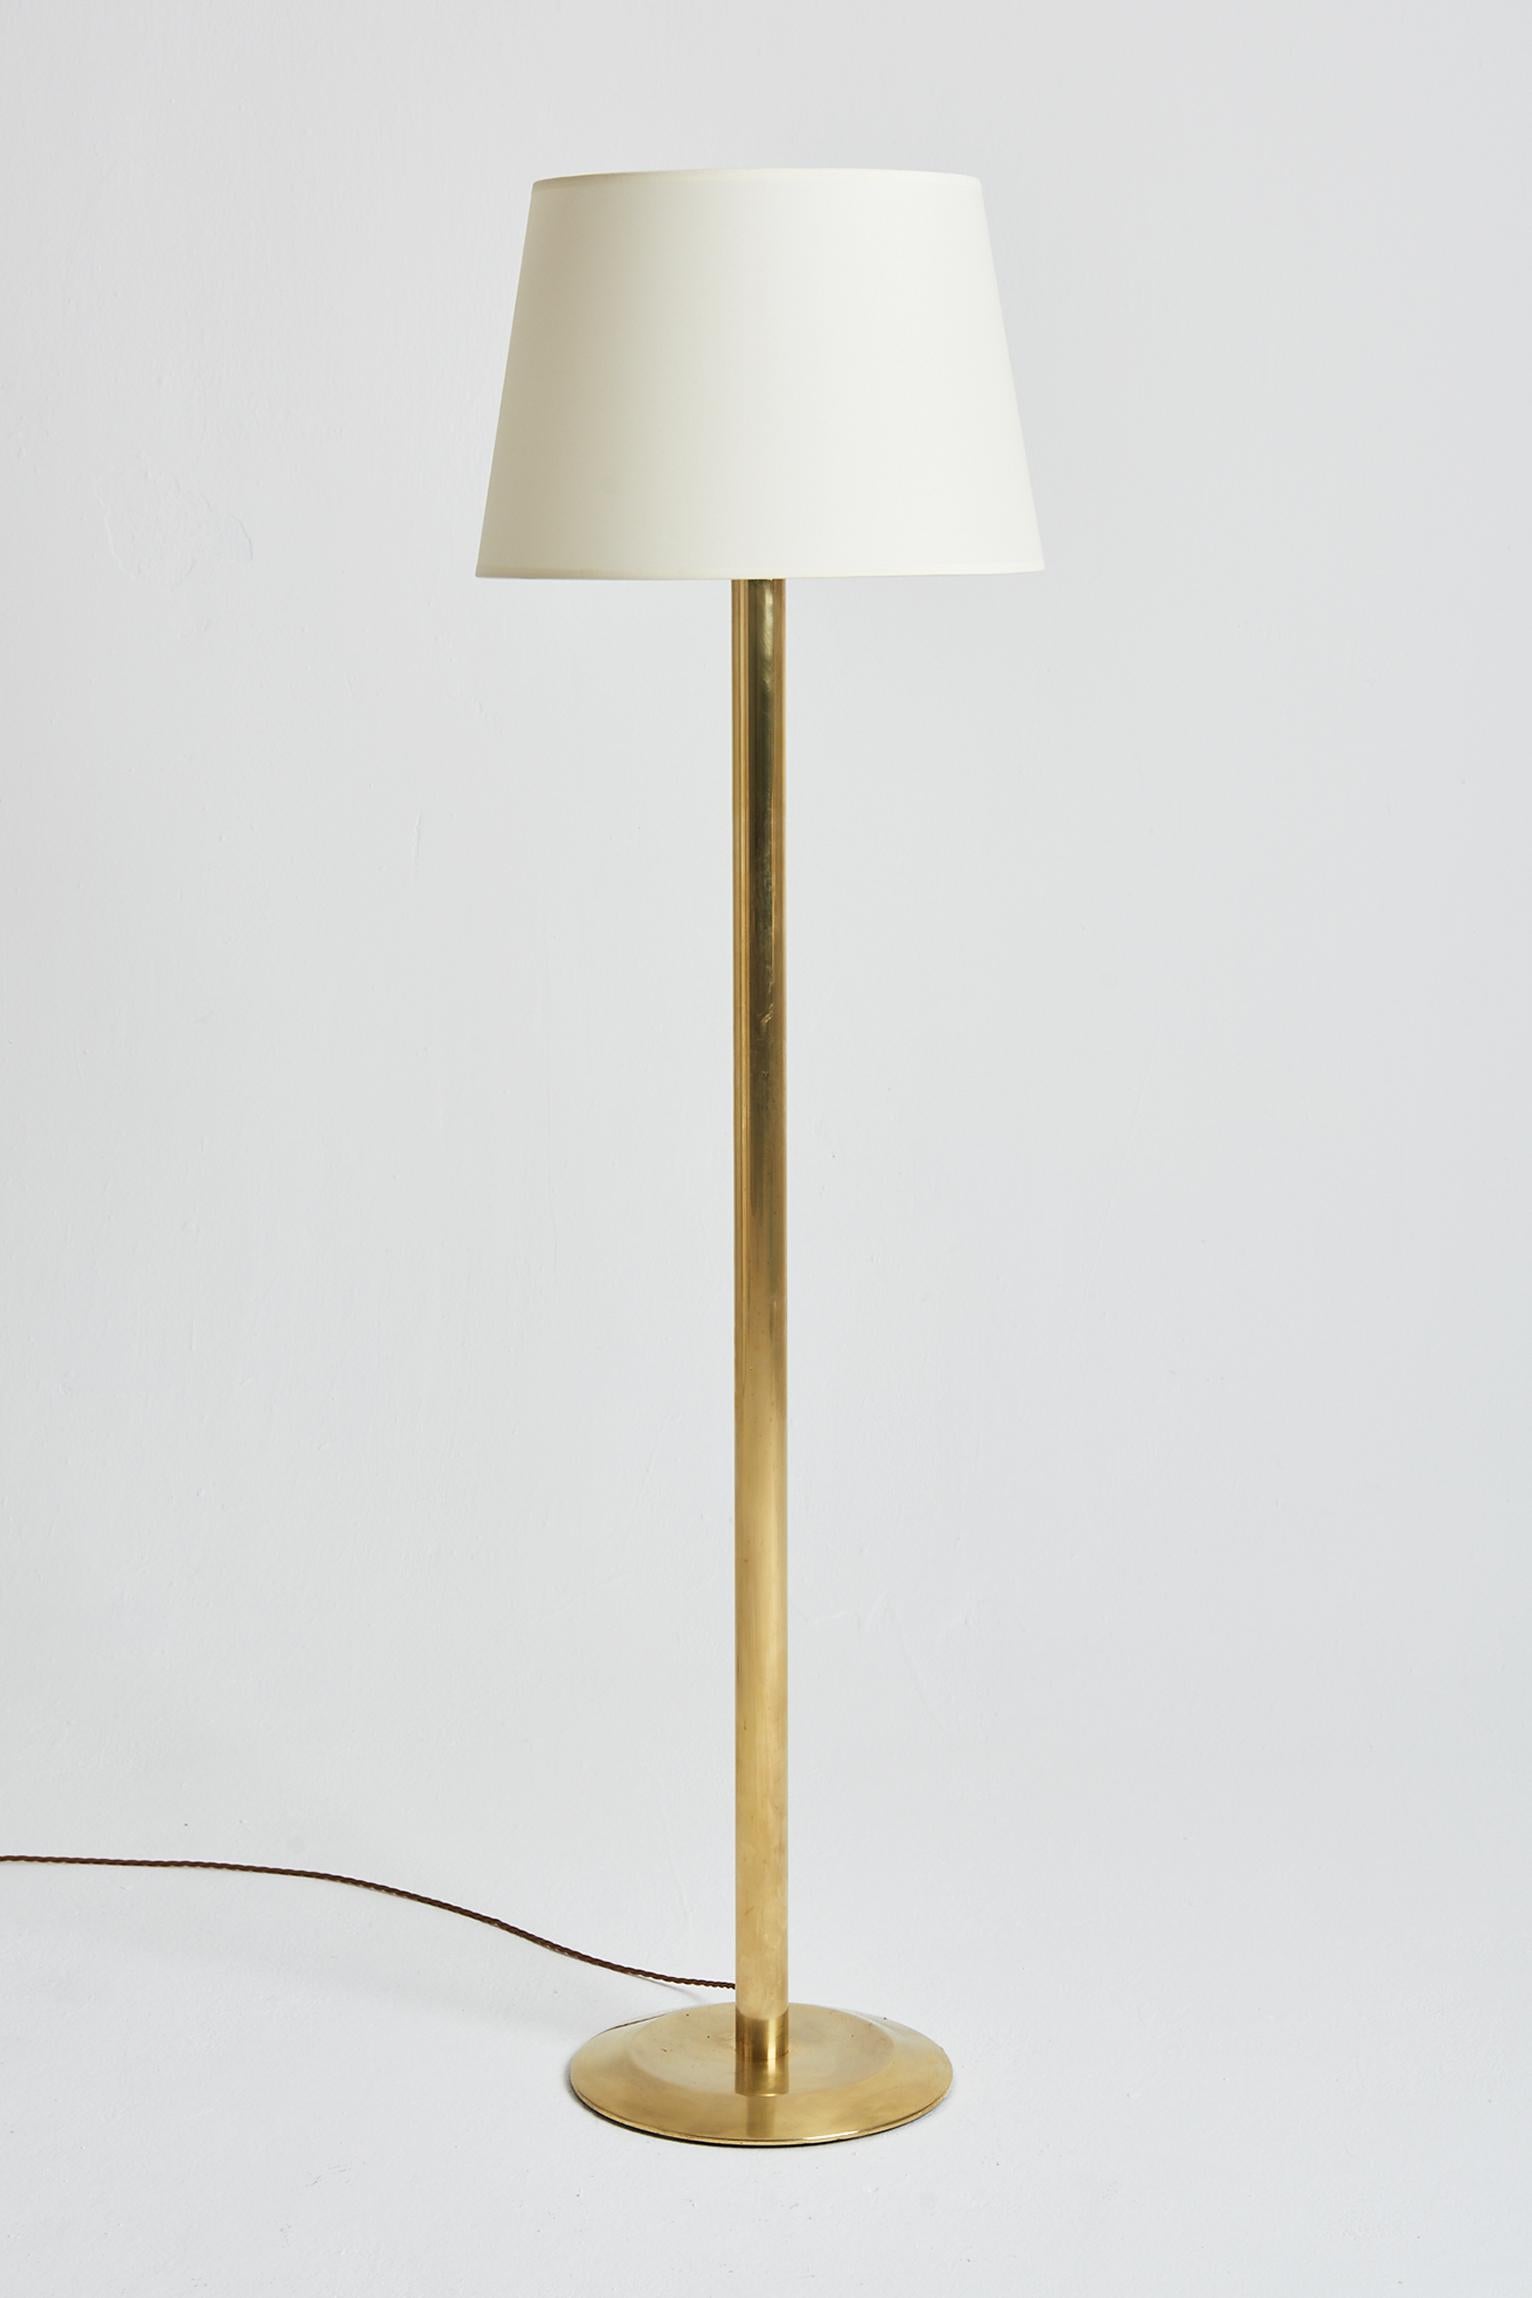 A pair of brass floor lamps.
Sweden, third quarter of the 20th century.
With the shade: 159 cm high by 45 cm diameter.
Lamp bases only: 133 cm high by 32 cm diameter.